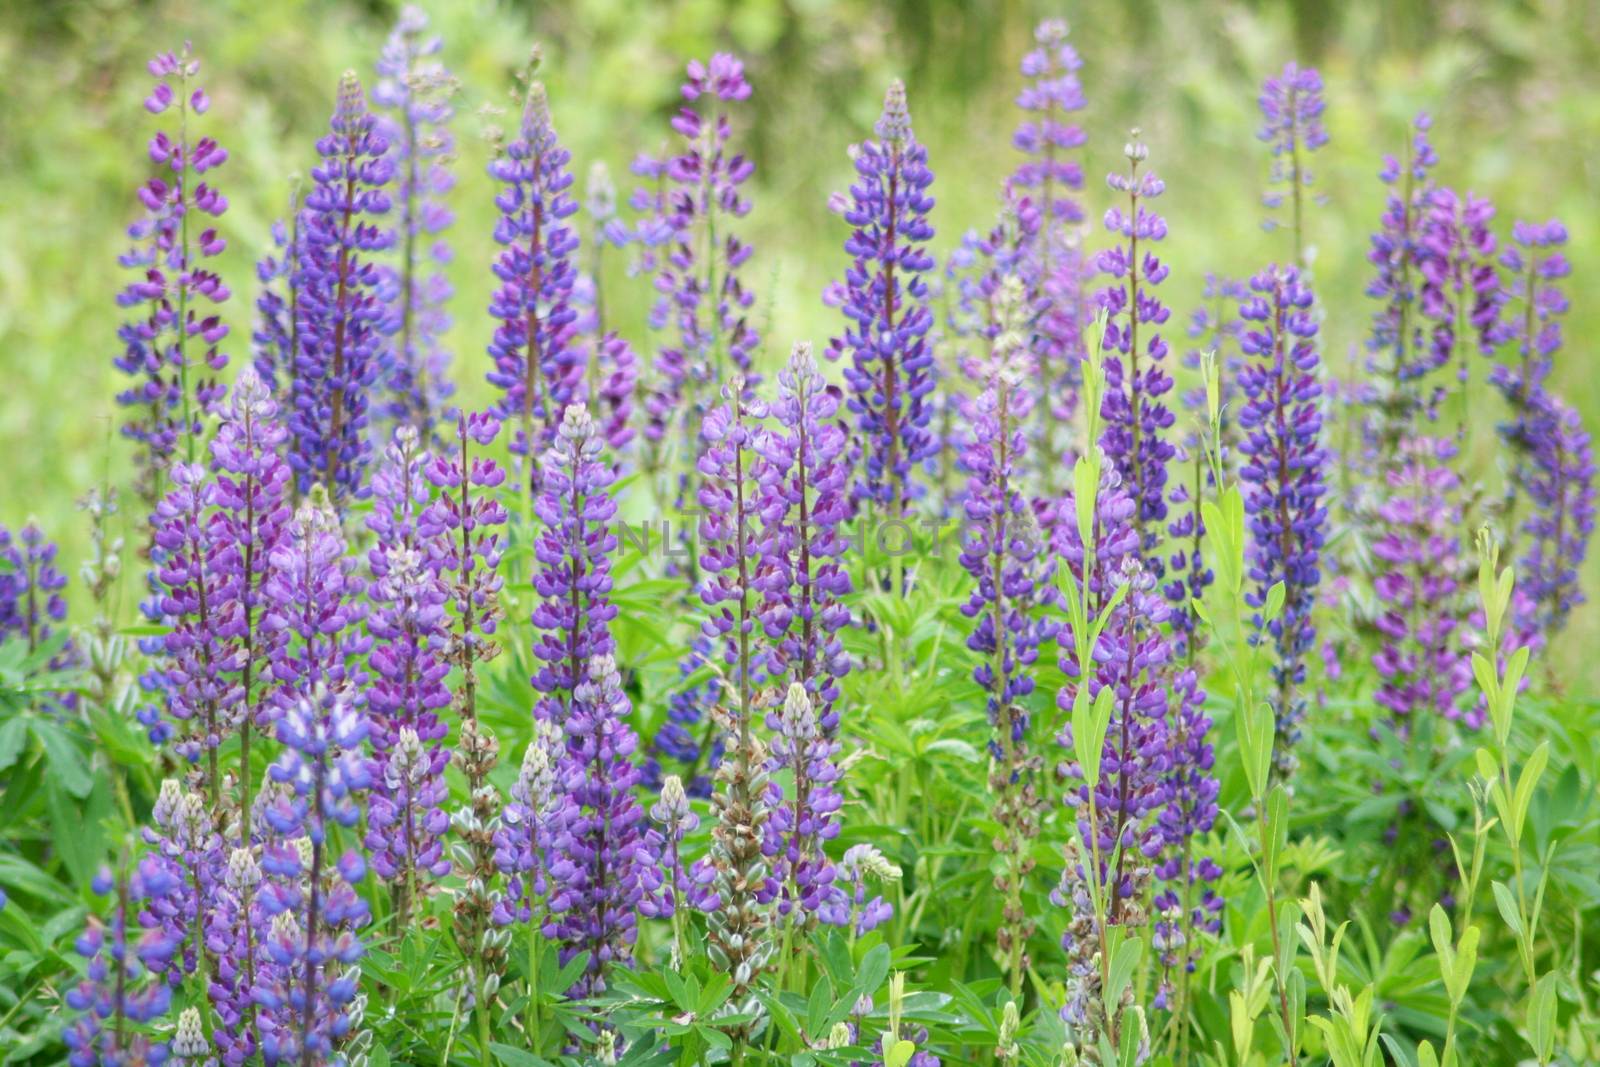 a larger number of narrow-lupine (Lupinus angustifolius)